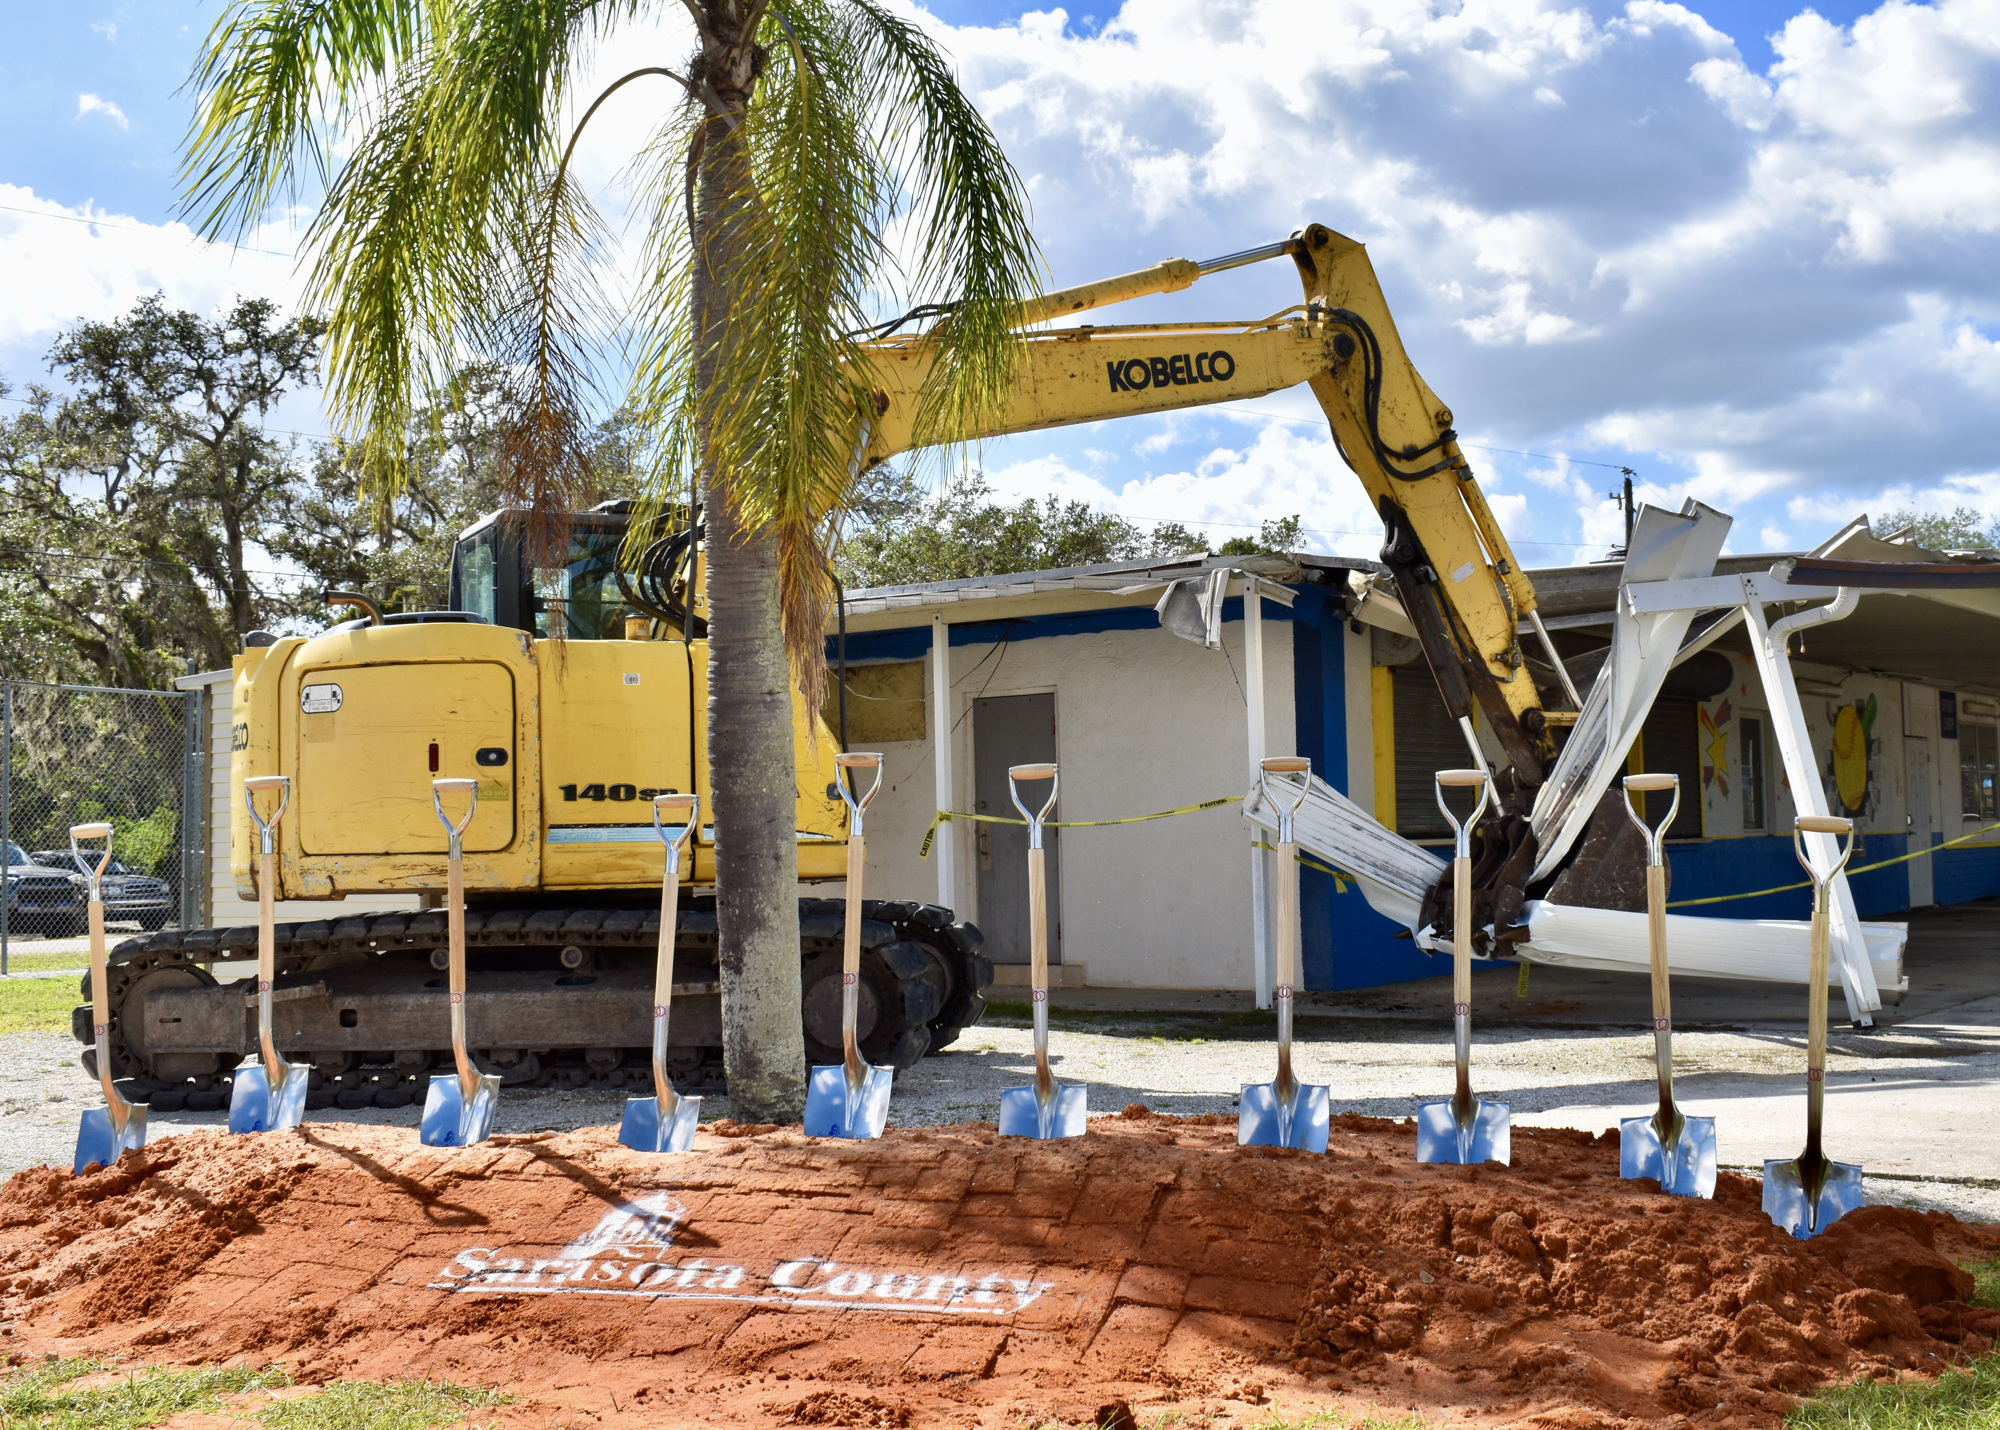 A piece of heavy machinery begins demolishing the concession stand at the 17th Street Park's Miss Sarasota softball complex. (Eric Garwood)